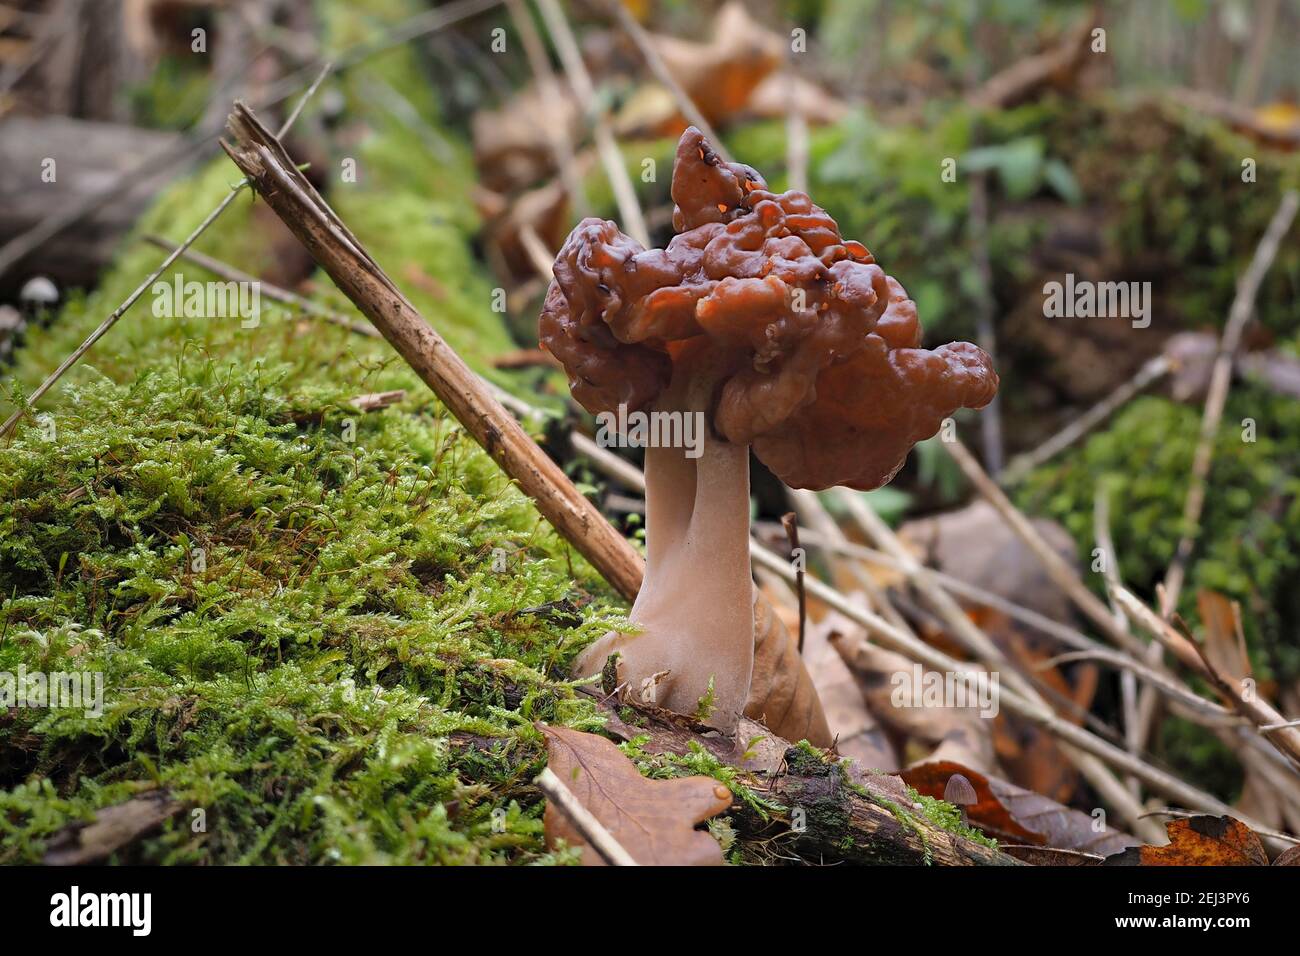 The hooded false morel (Gyromitra infula) is a deadly poisonous mushroom , an intresting photo Stock Photo